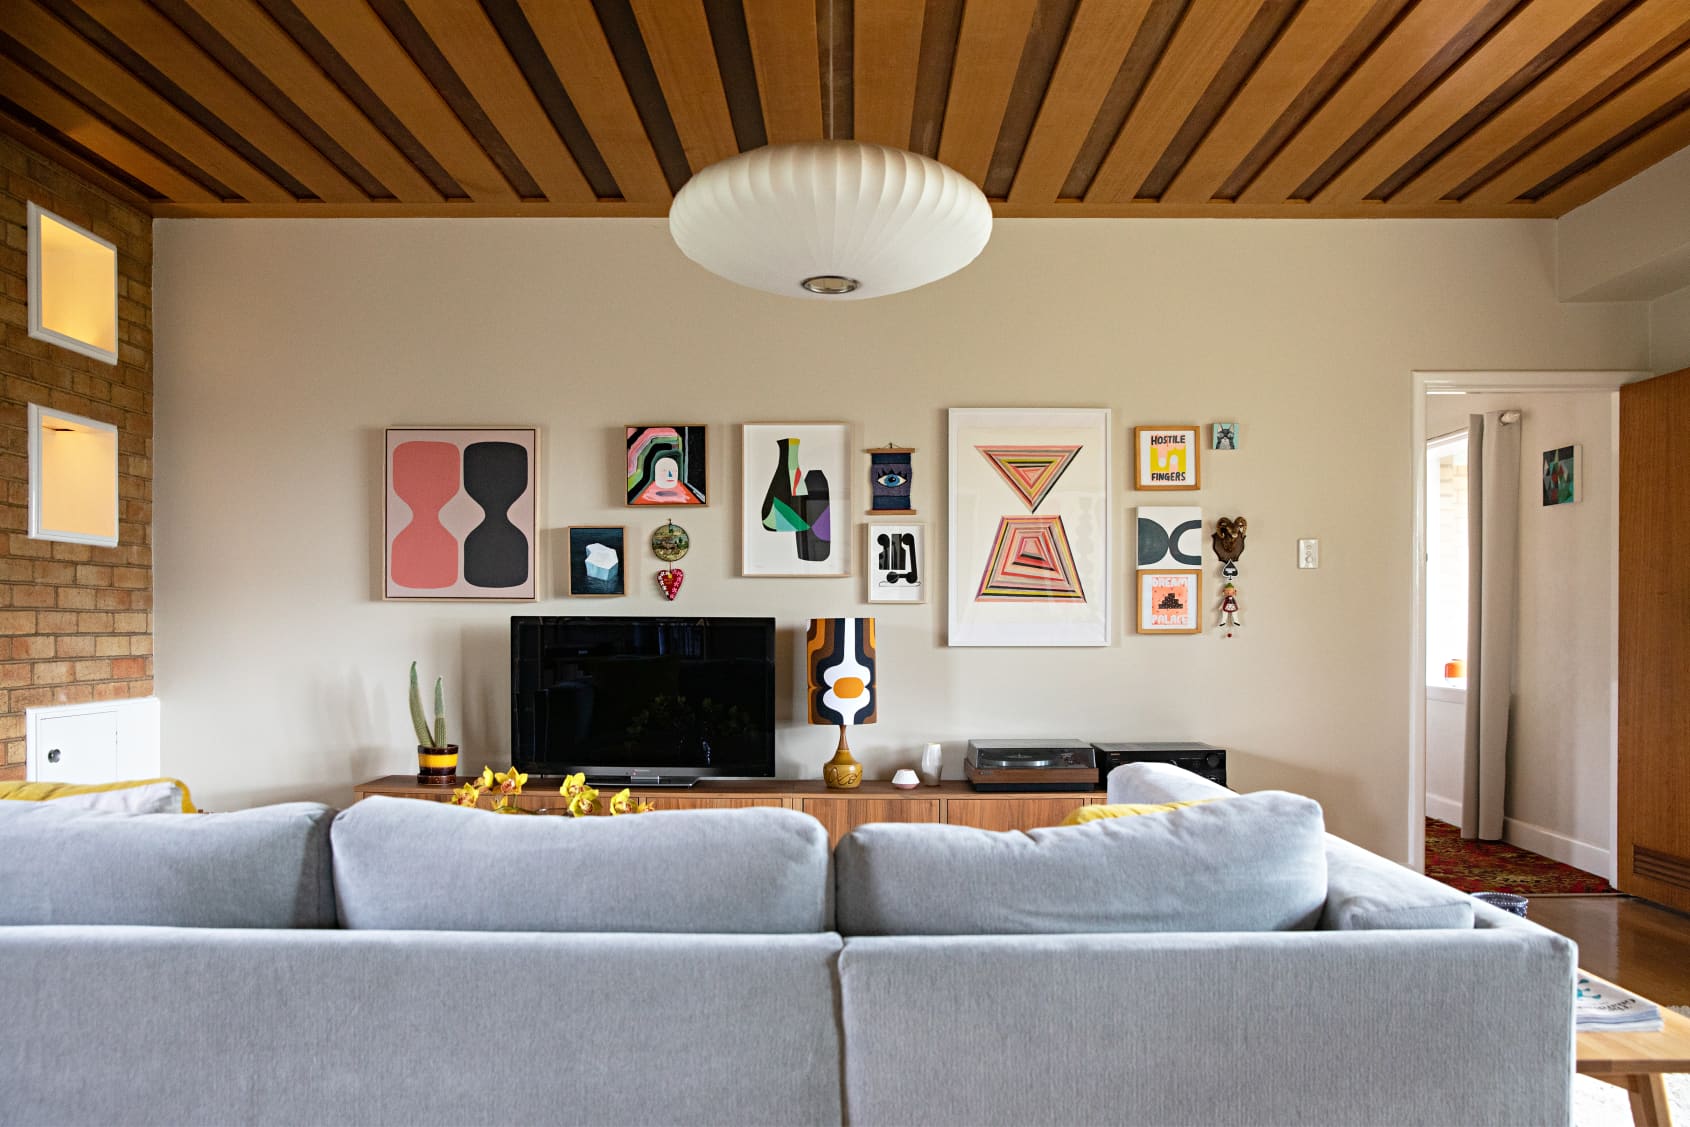 Inaluxe interior living room with grey sofa, wood ceiling, and featured art work